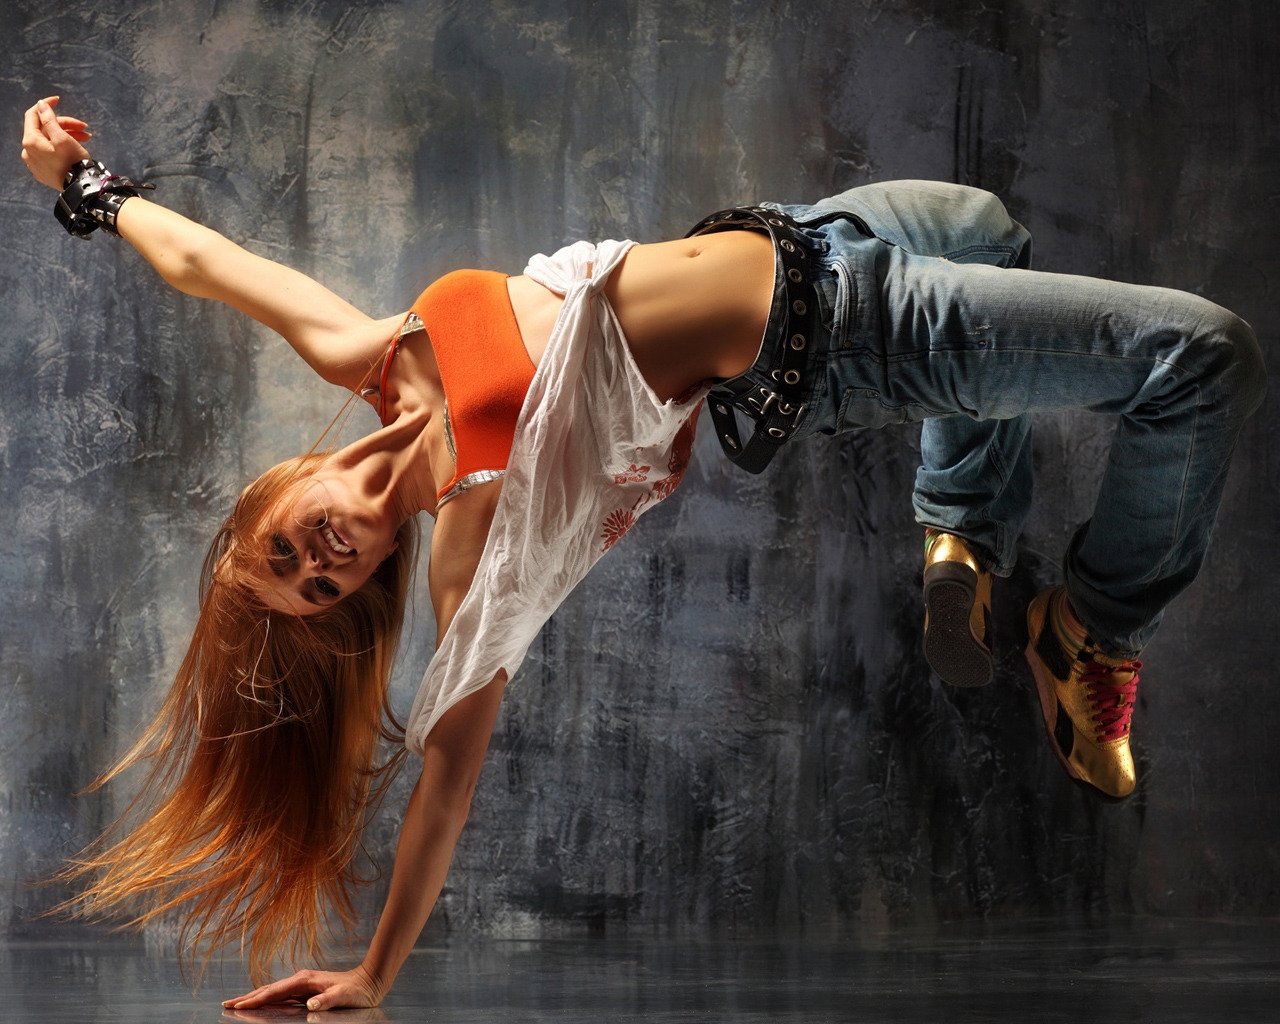 Girl Breakdancing for 1280 x 1024 resolution